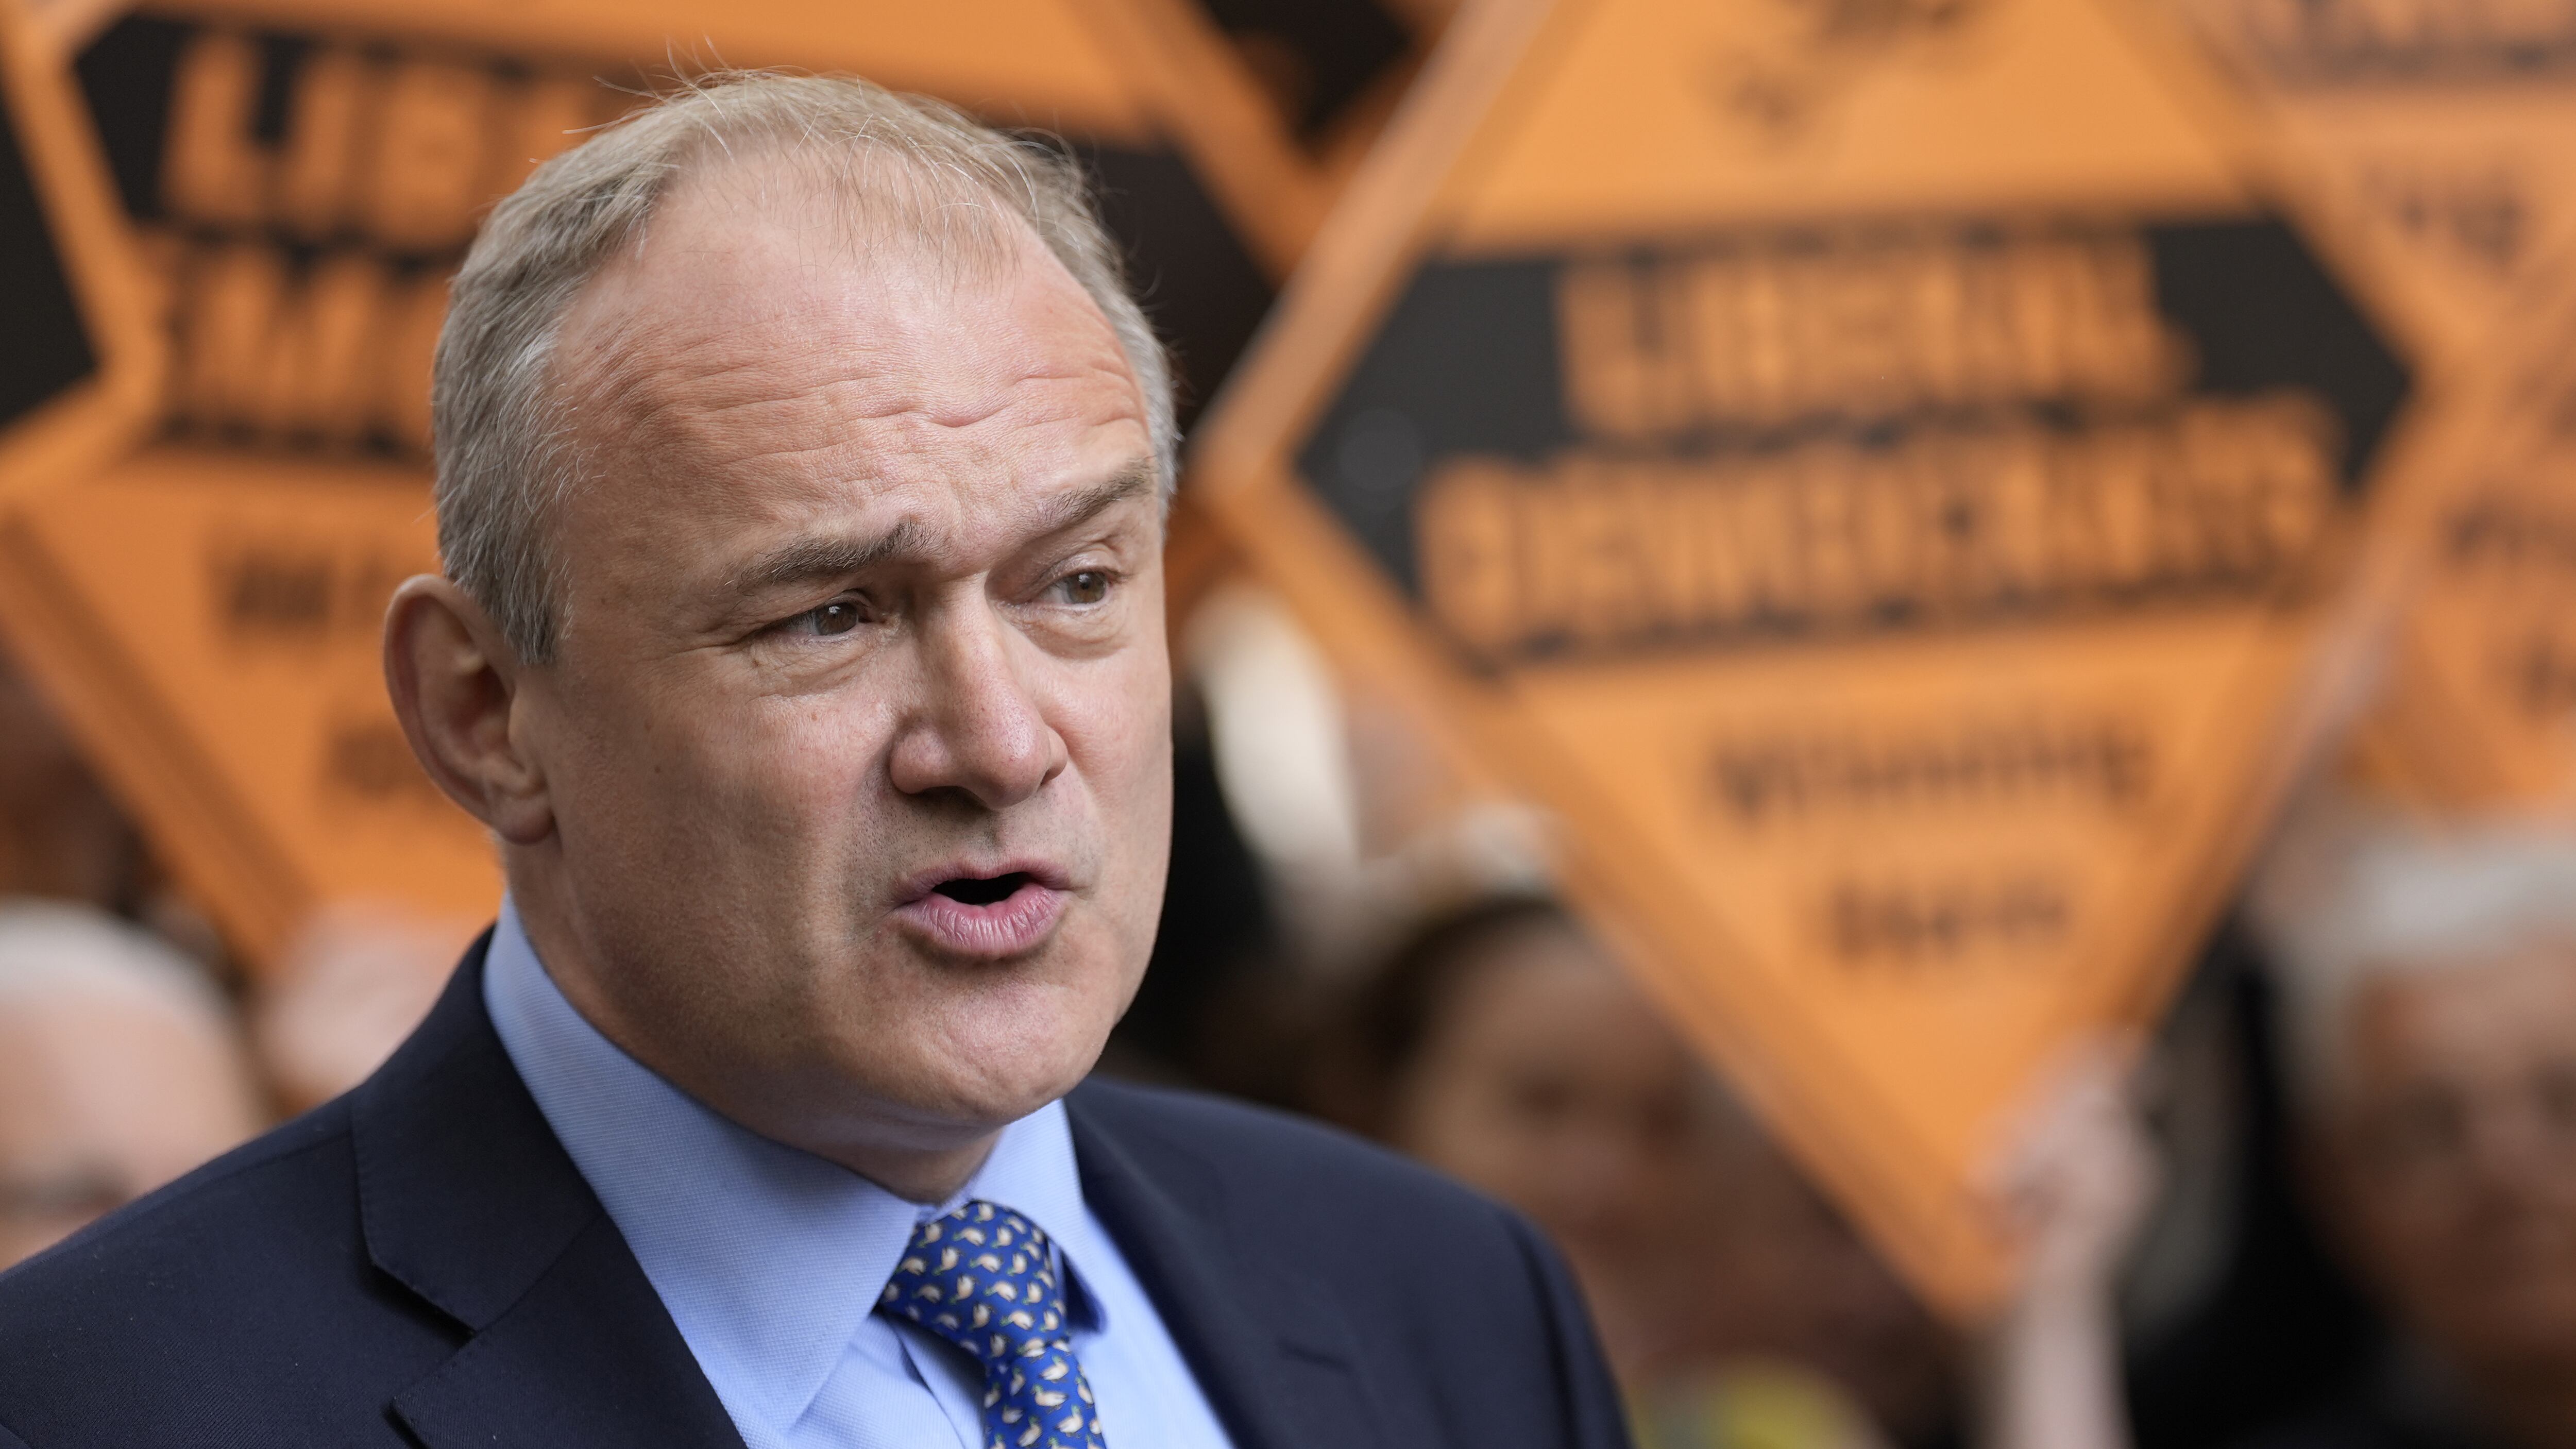 Sir Ed Davey will be in Scotland for the launch